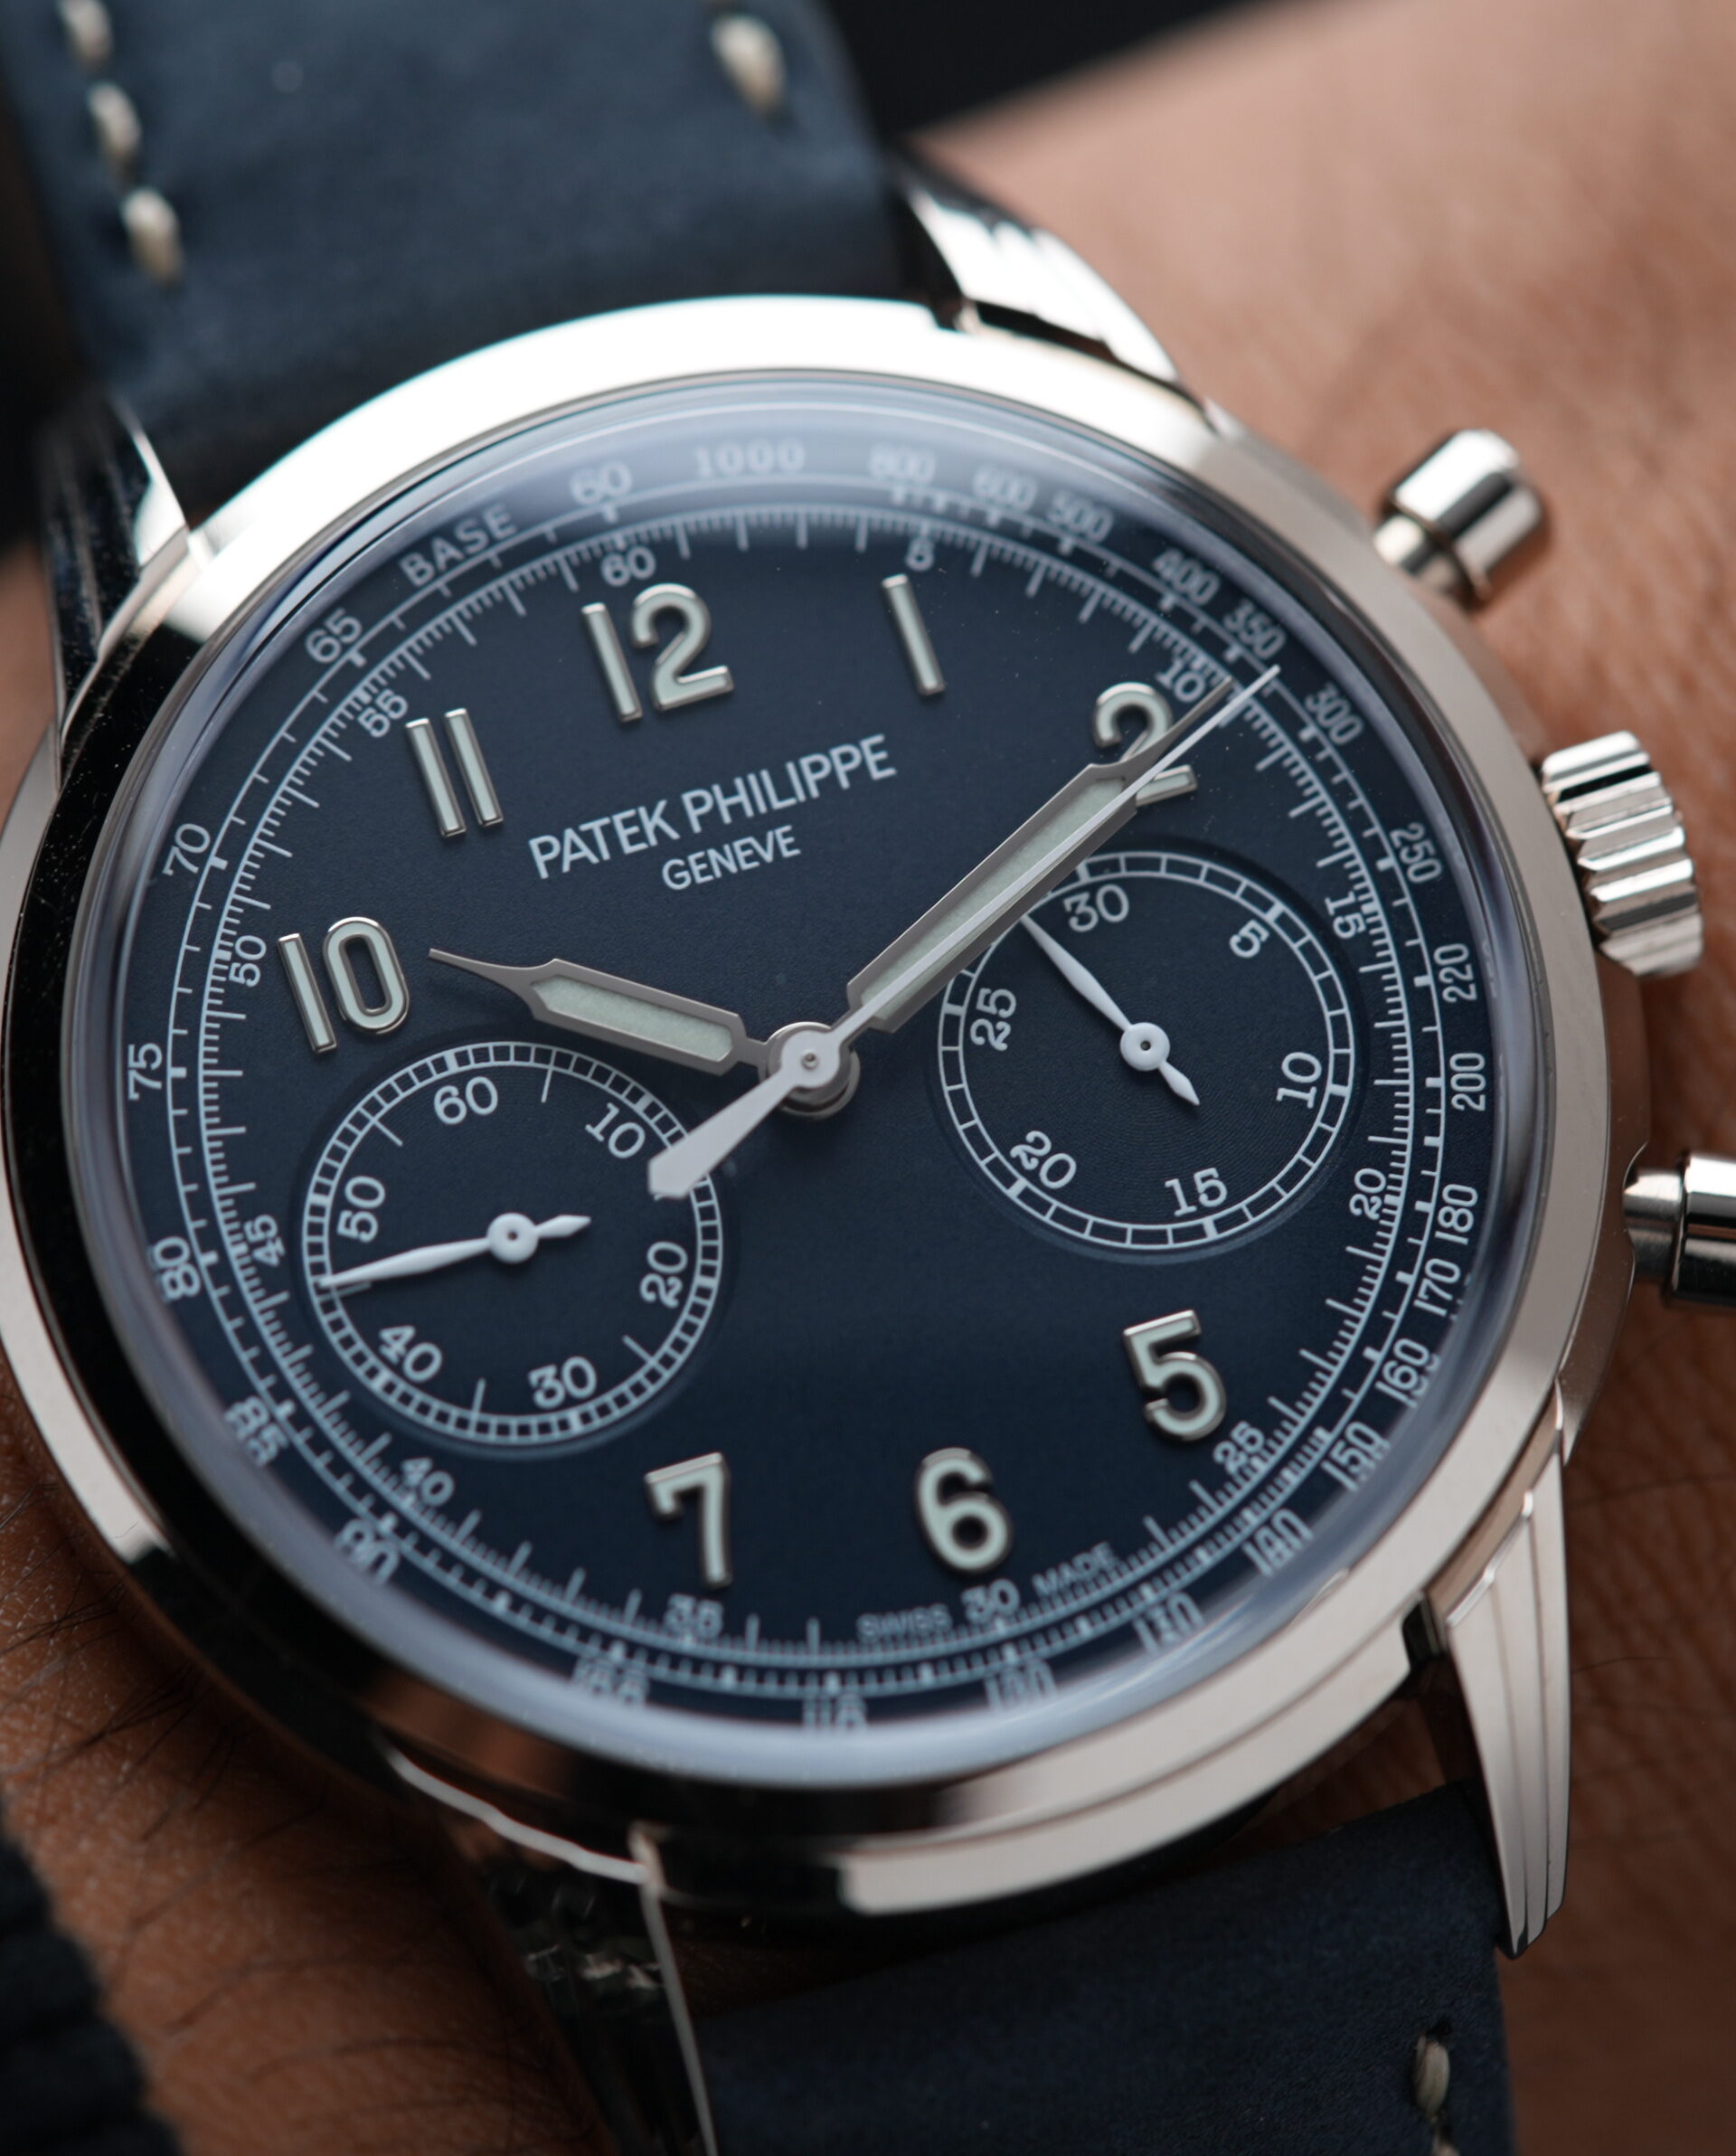 Patek Philippe Chronograph 5172 Complications Chronograph Recently Serviced Seal 5172G-001 White Gold watch displayed setting on the wrist.